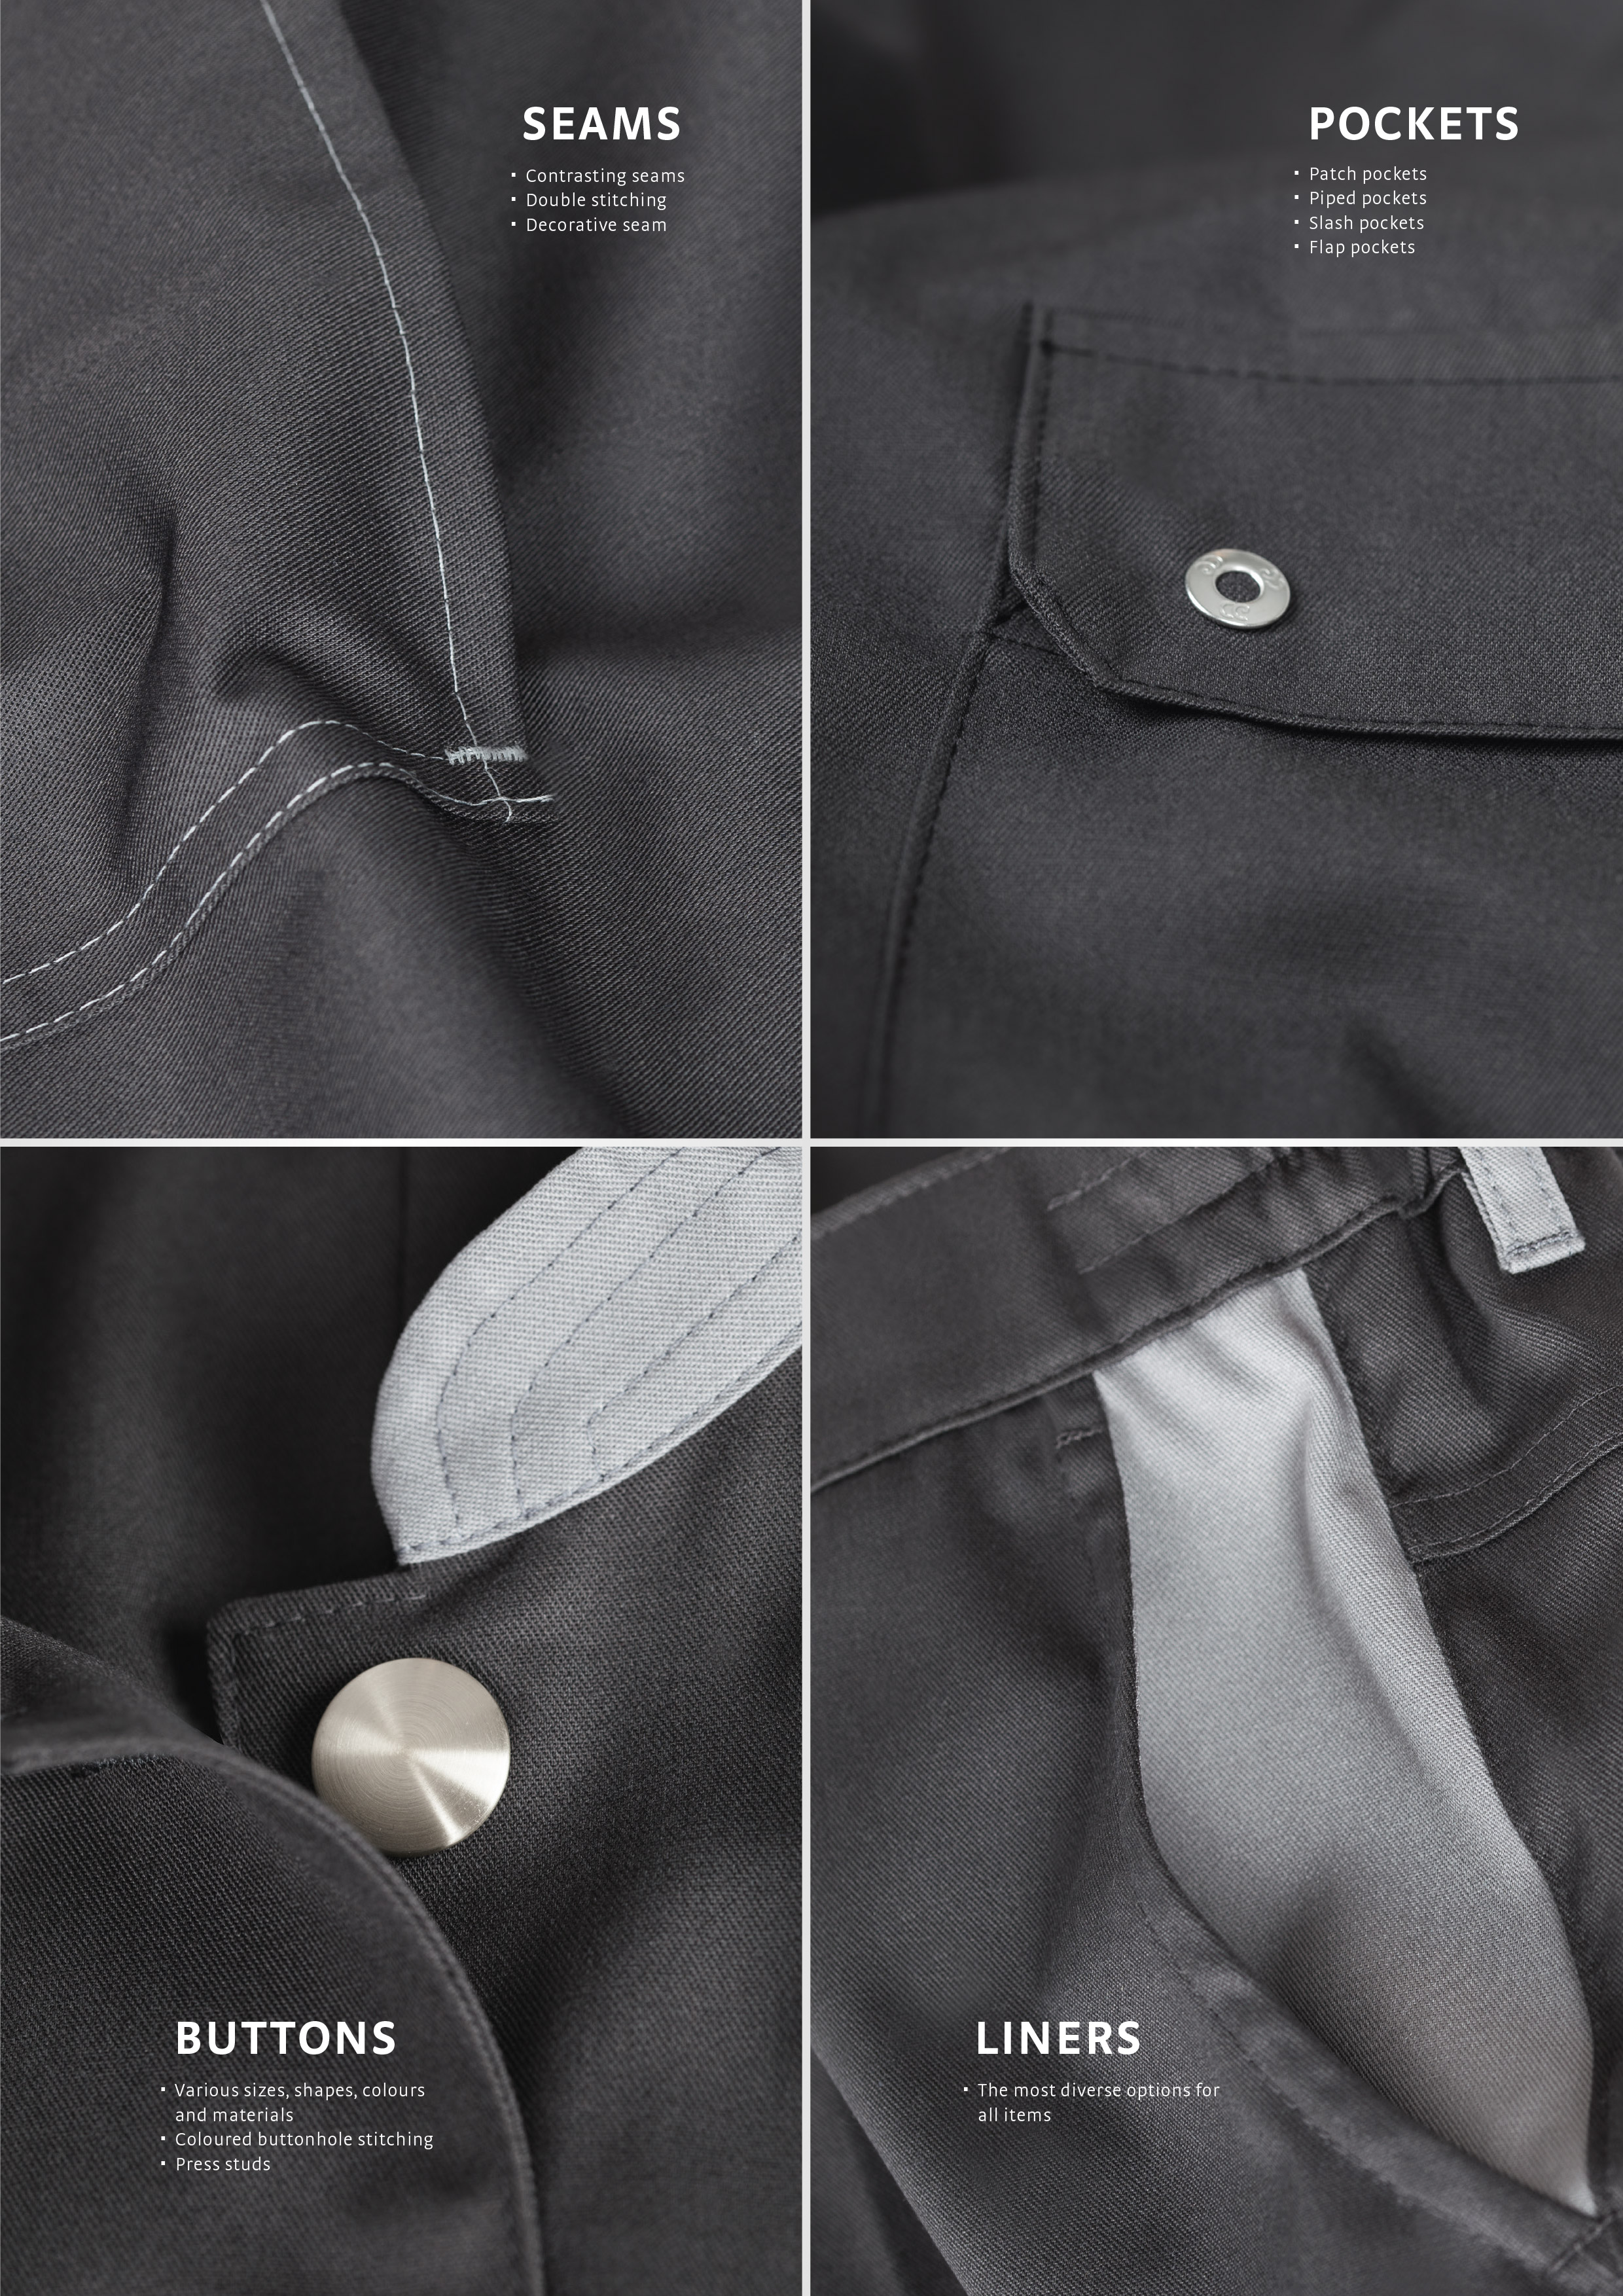 Design Freedom Seams-Pockets-Buttons-Liners